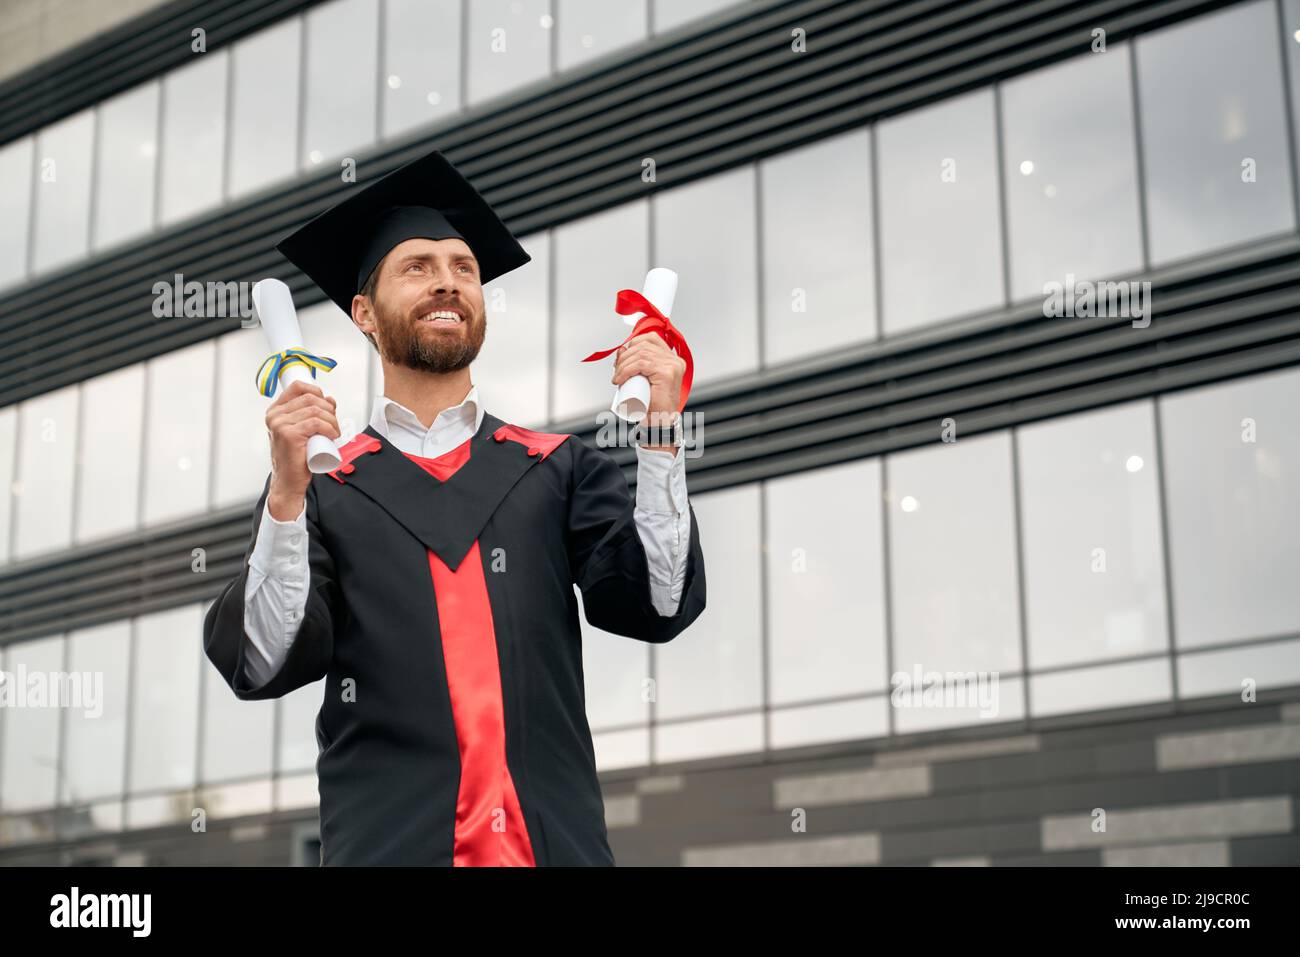 Front view of master graduating from college, university, high school. Male student in graduate gown and mortarboard standing, holding two diplomas, smiling. Concept of success. Stock Photo